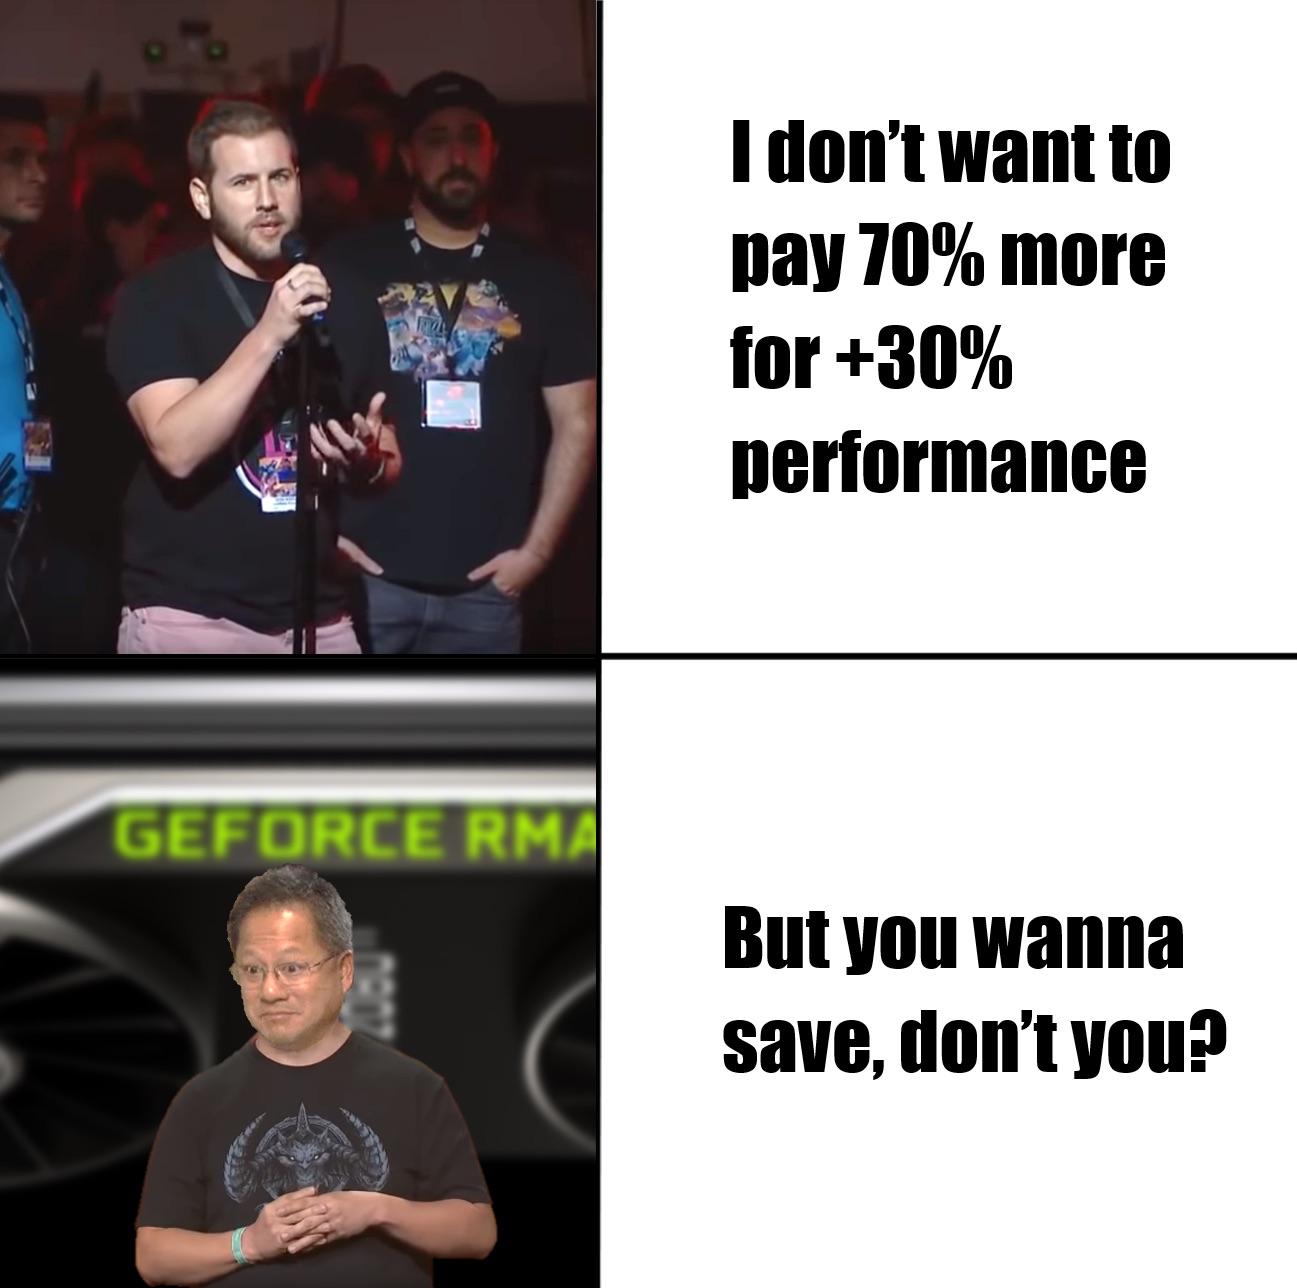 tHe MoRe GpUs YoU bUy, ThE mOrE mOnEy YoU sAvE. : AyyMD